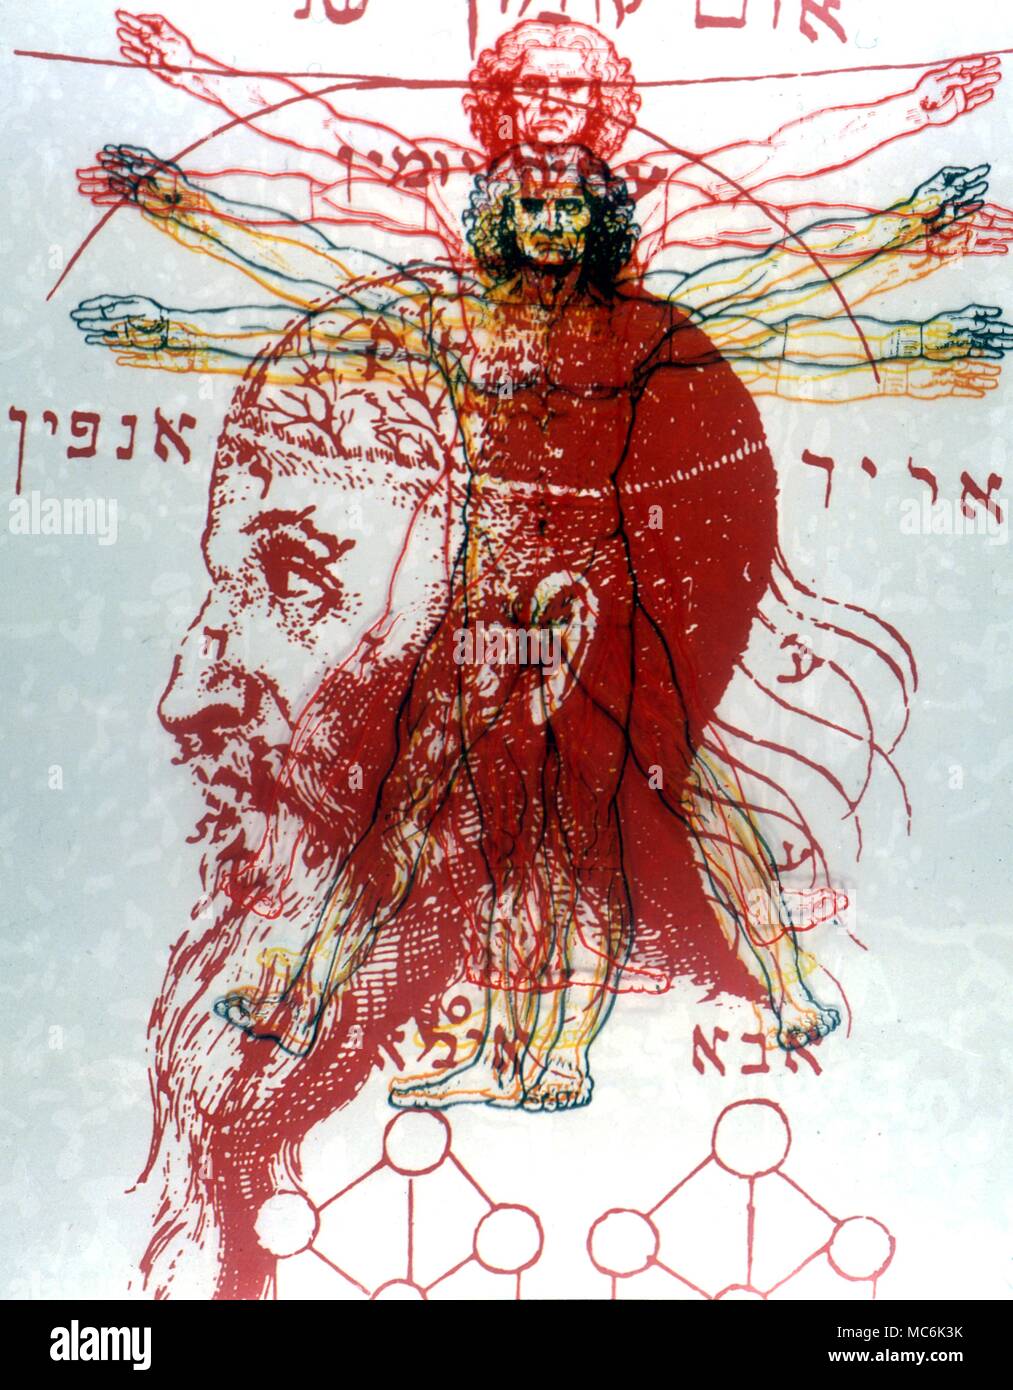 Cabbala Adam Kadmon The head of Adam Kadmon overlaid with drawings of the sacred man of divine proportions as dran by Leonardo da Vinci Cabbala n : sometimes called Kabbalah has two meanings; the first being a body of mystical teachings of rabbinical origin, which are based on an esoteric interpretation of the Hebrew Scriptures. The Cabbala is also known as a secret doctrine resembling these teachings. A traditionally secret esoteric or occult matter The Sephirothic Tree consists of ten globes of luminous splendor arranged in three vertical columns and connected by 22 channels or pat Stock Photo